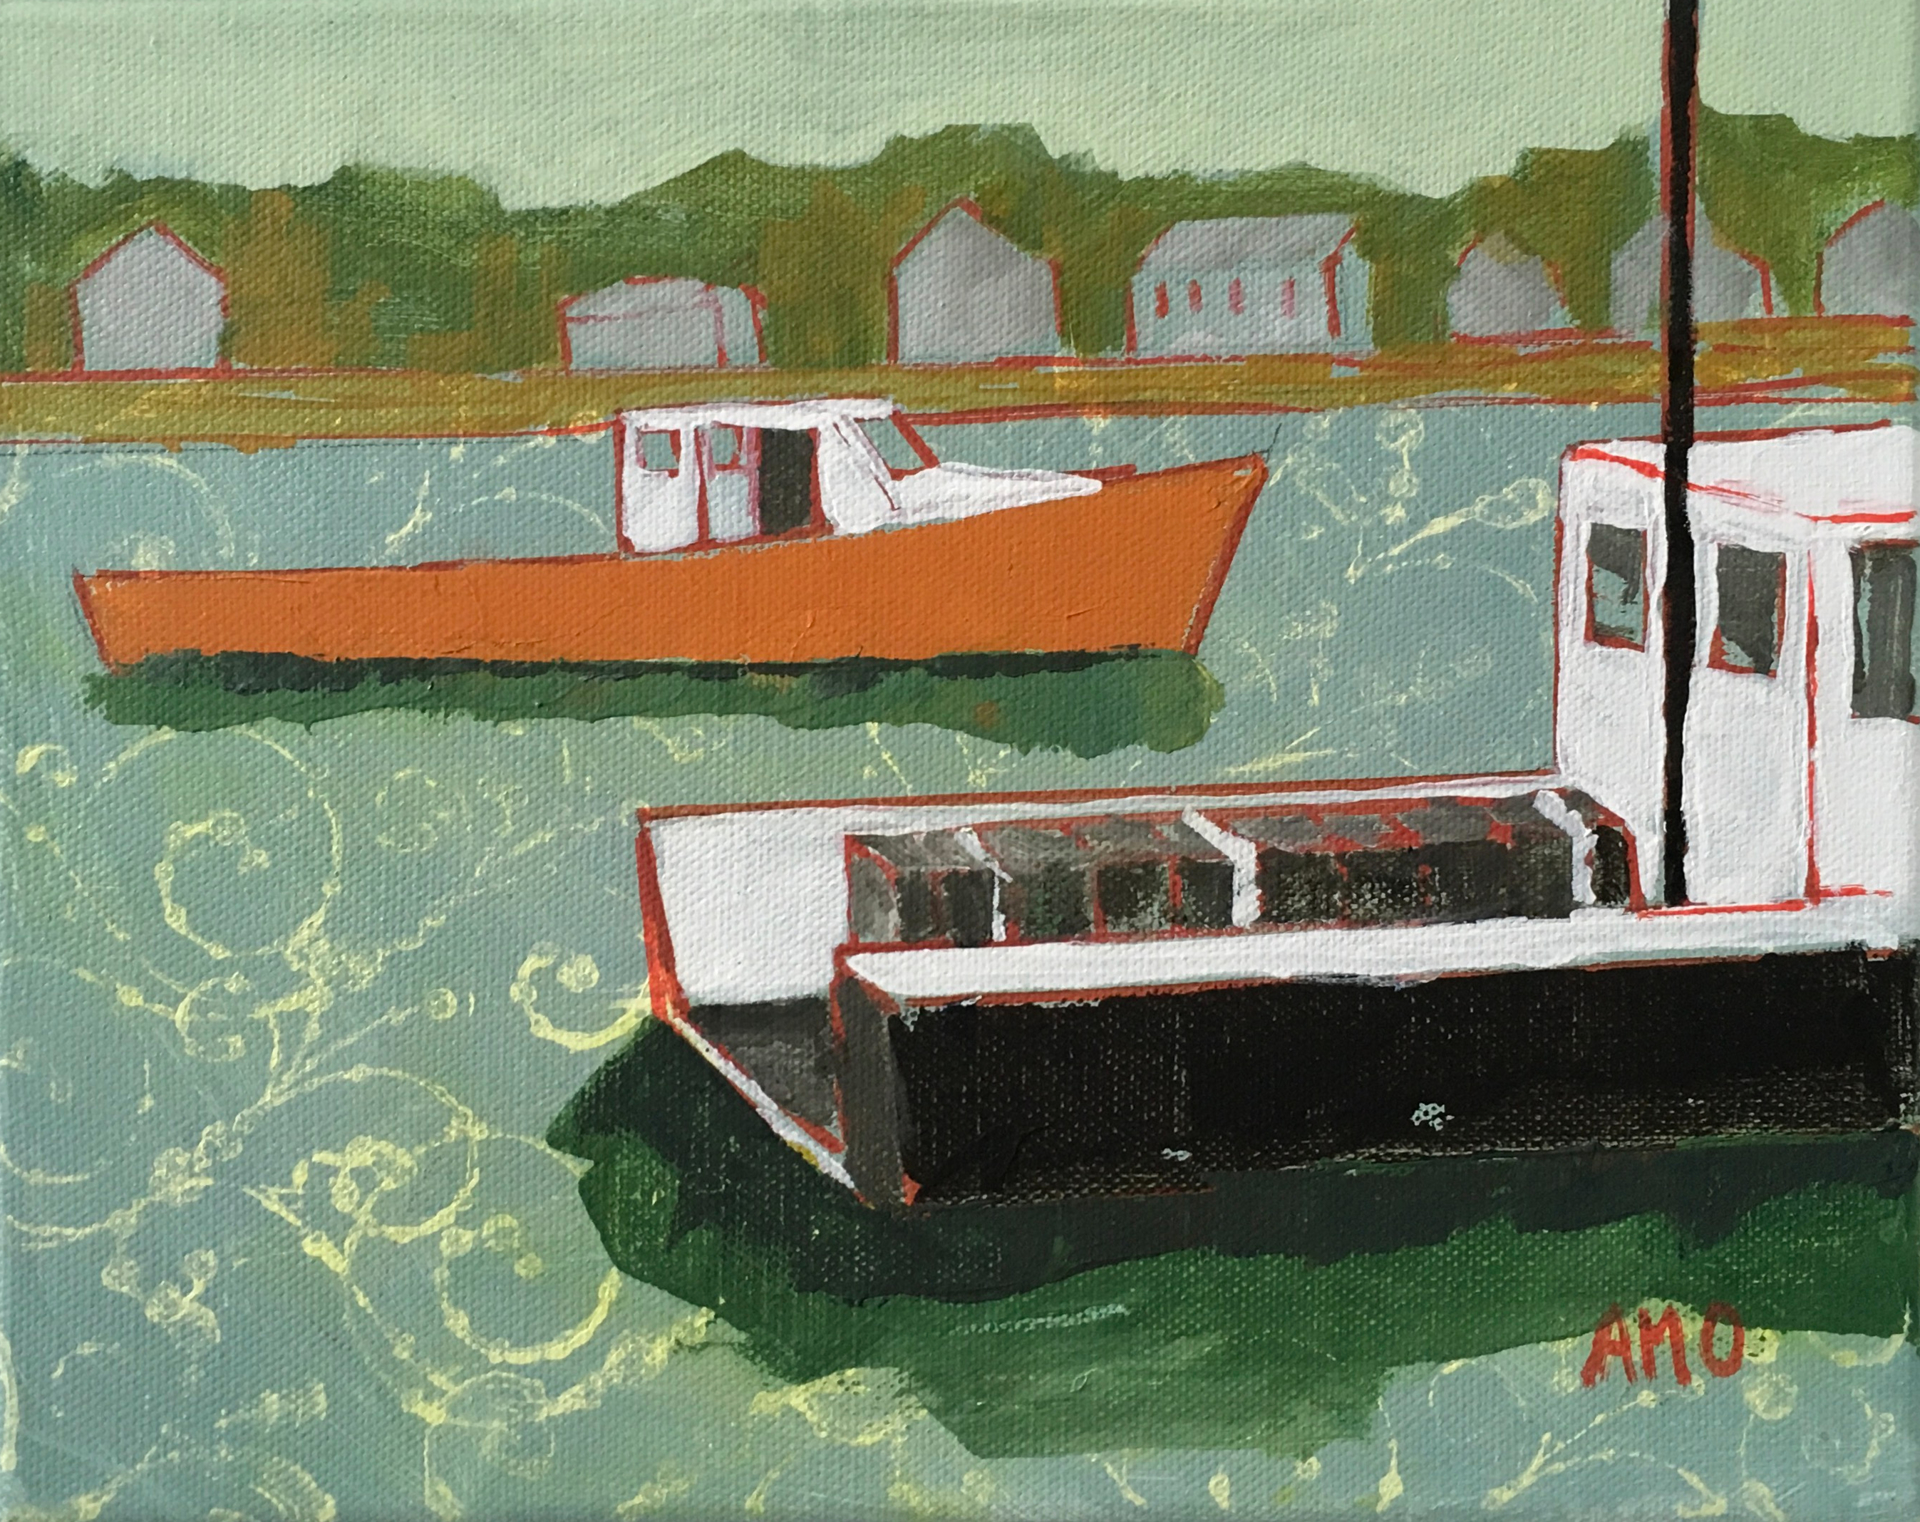 Lobster Boats on a Magical Sea by Ann Marie O'Dowd